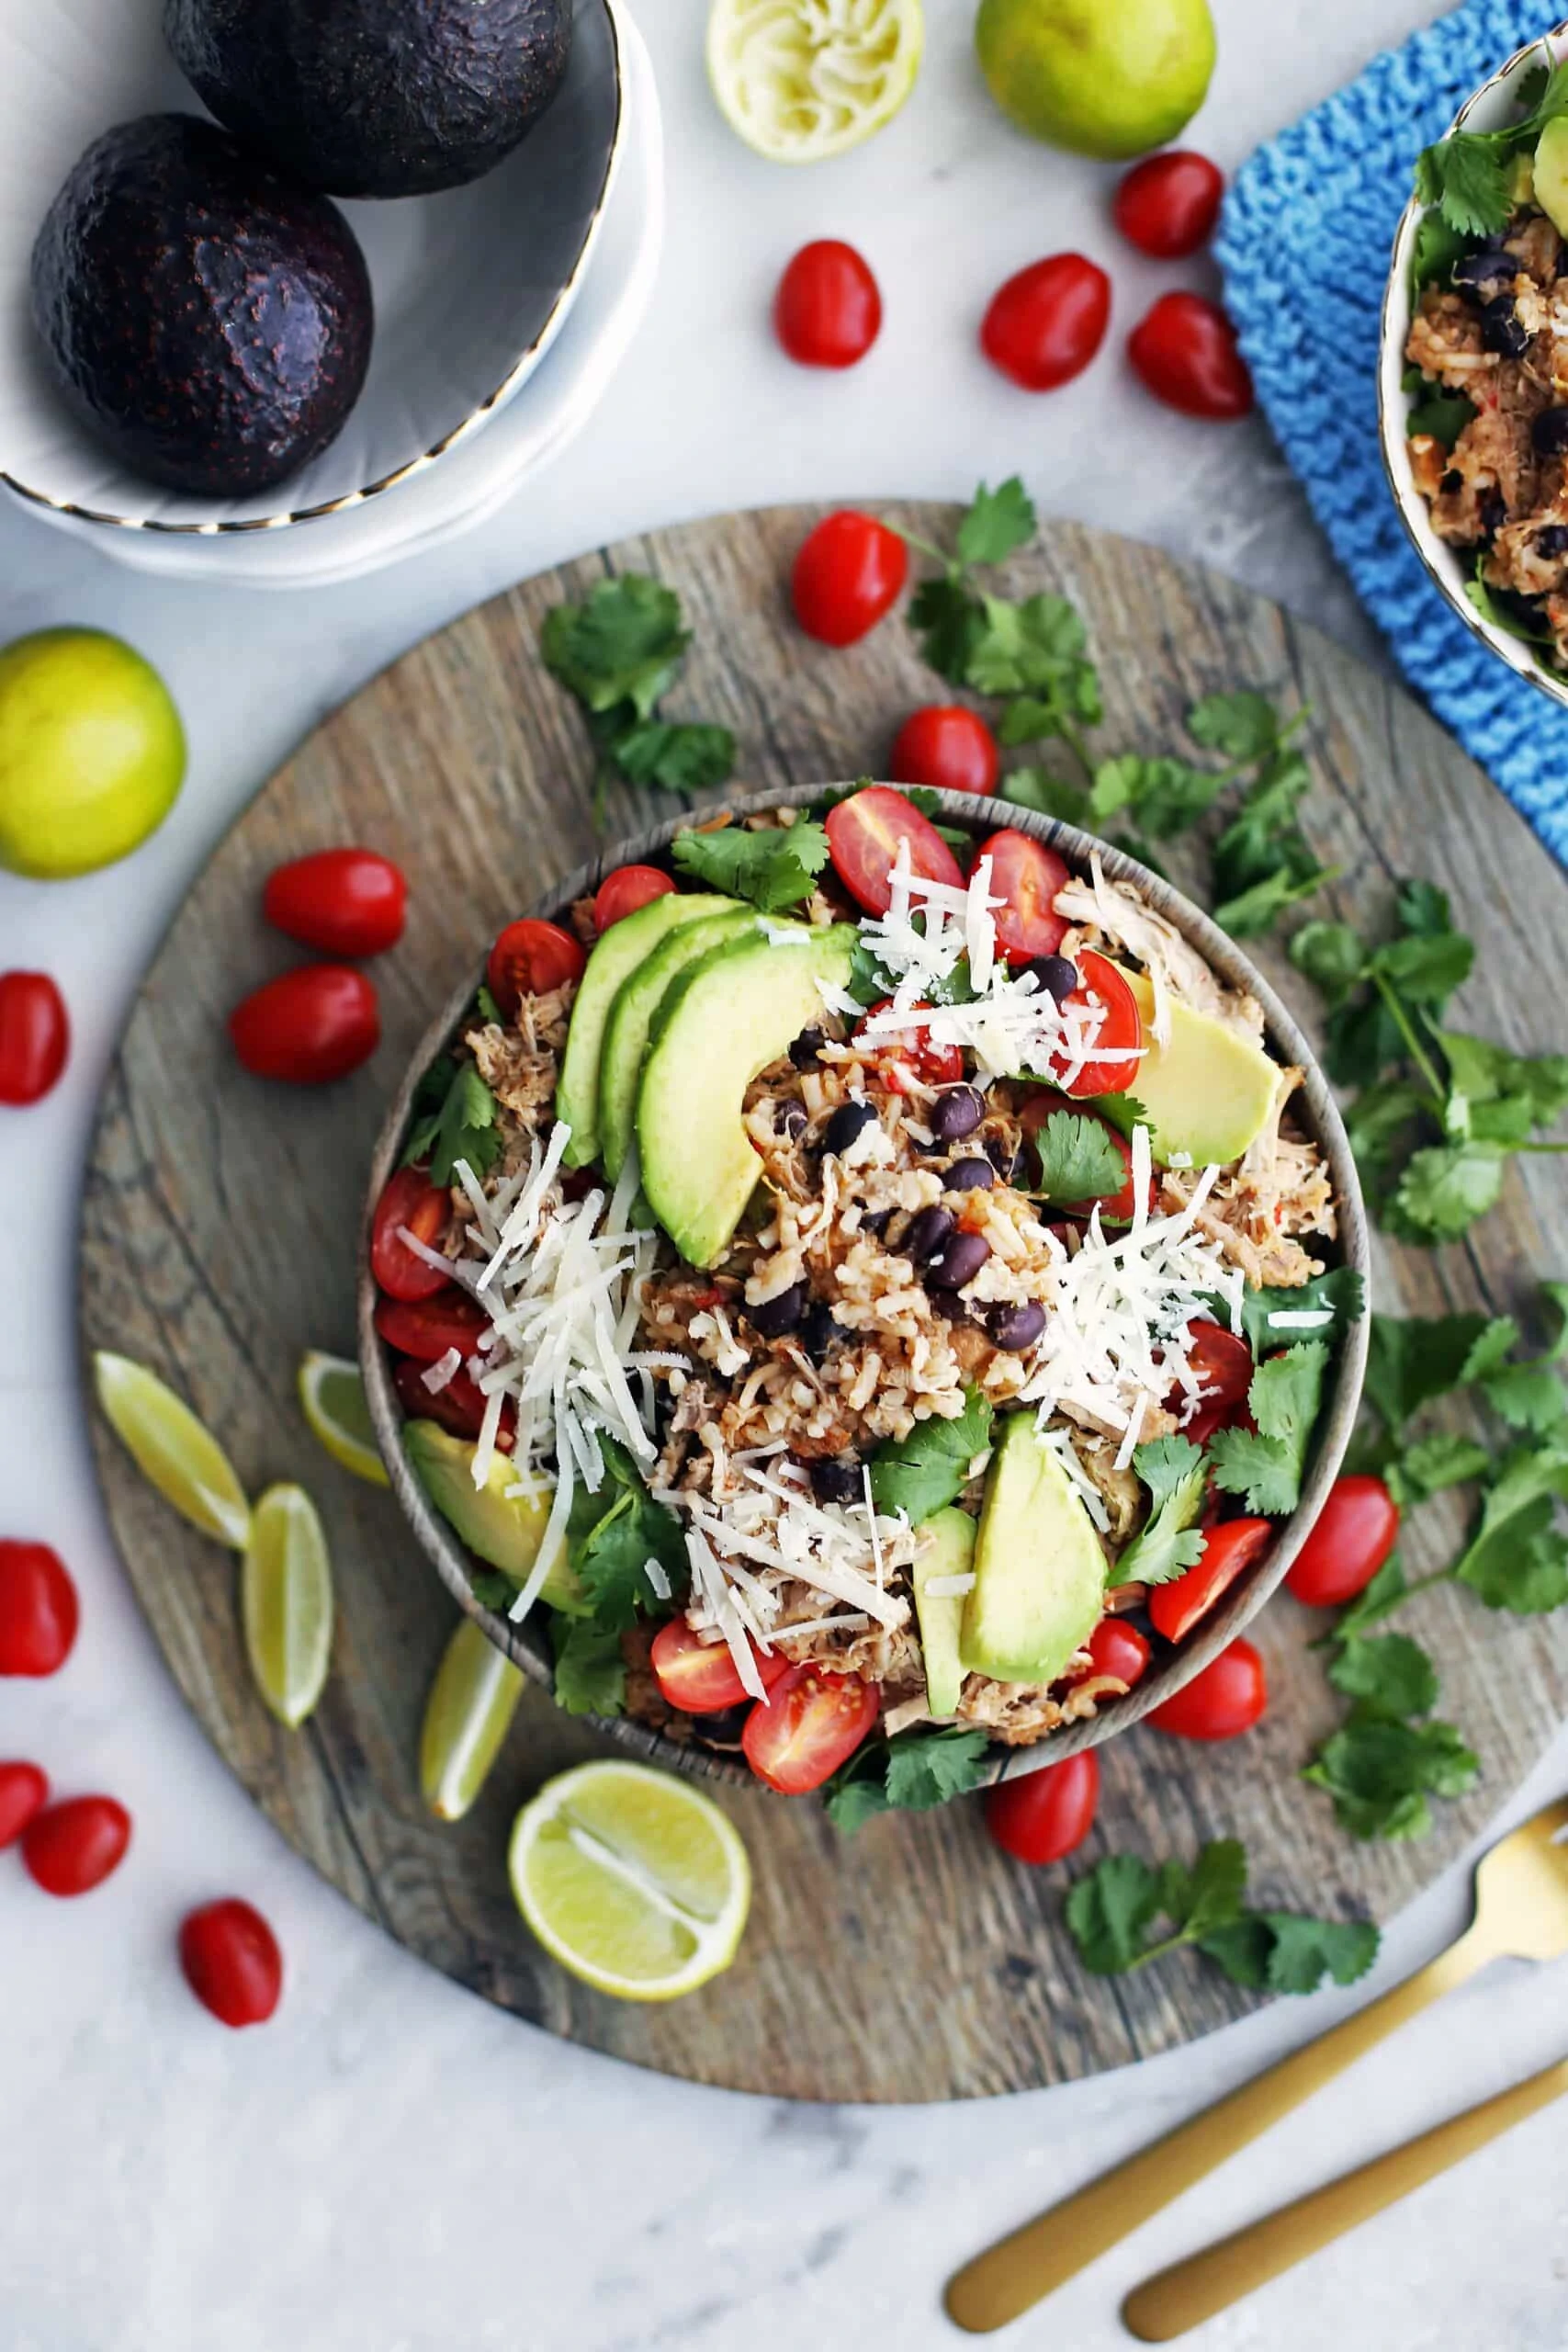 https://www.yayforfood.com/wp-content/uploads/instant-pot-chicken-rice-burrito-bowls-featured-scaled.jpg.webp